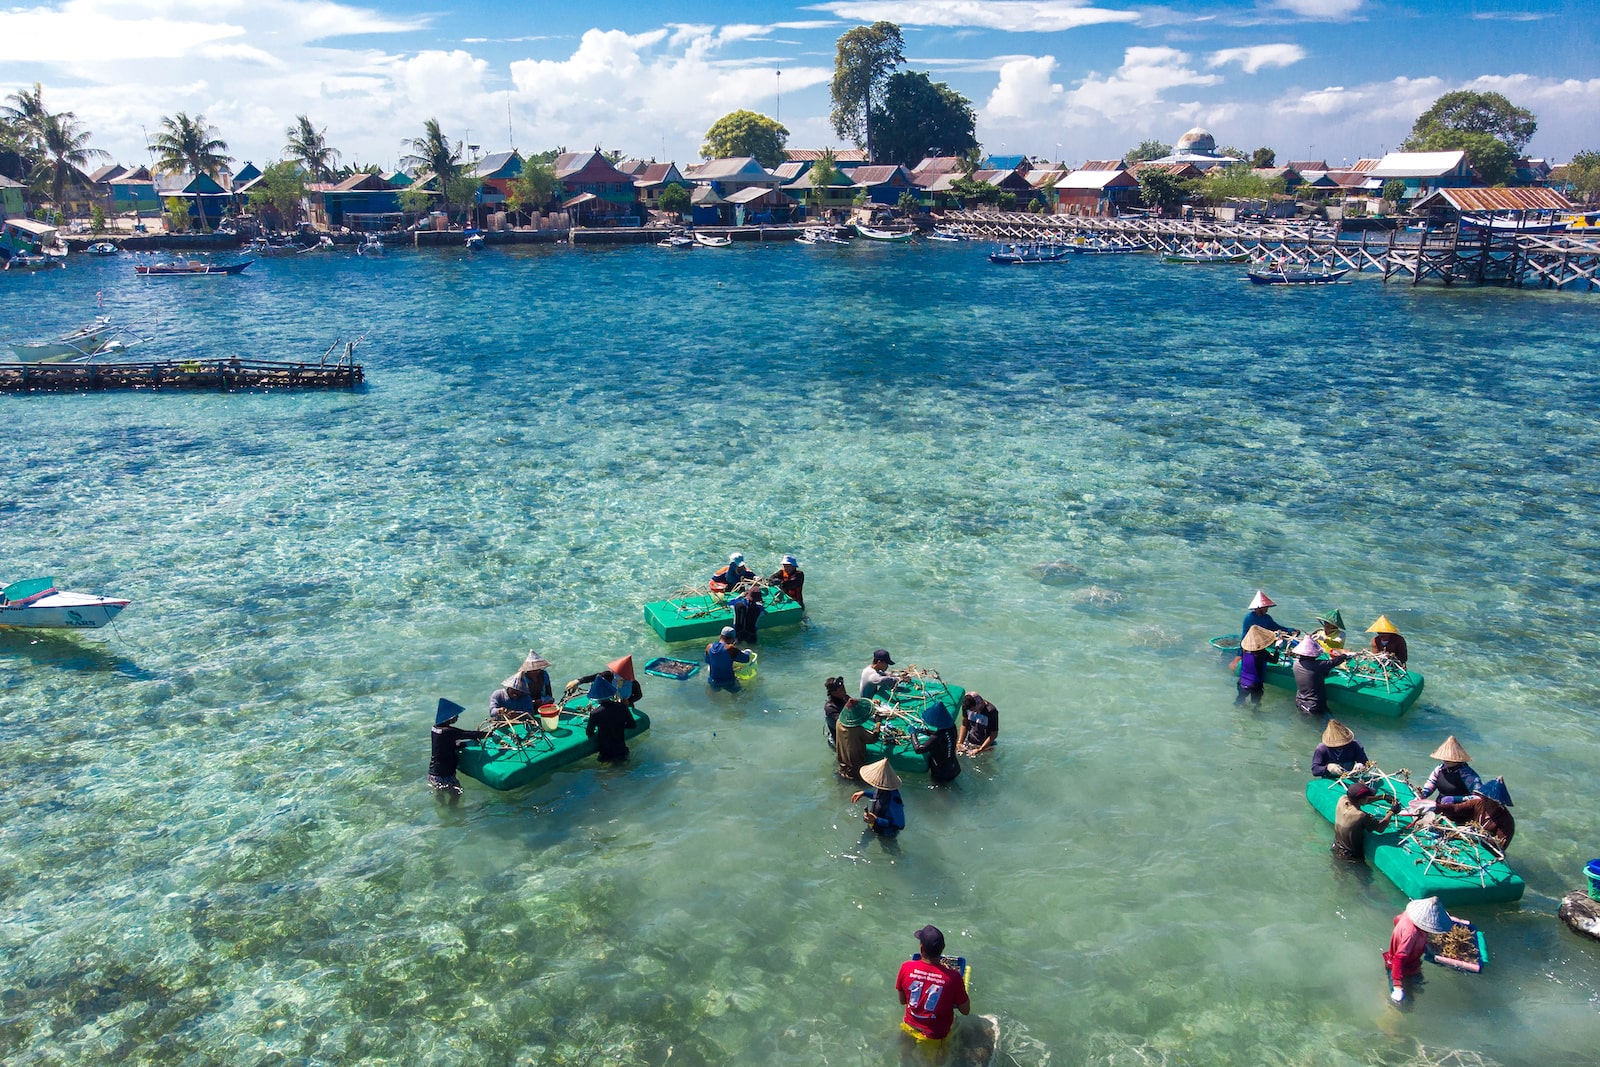 Groups of people surround green tables with star-shaped cages in the water on the shore of an island